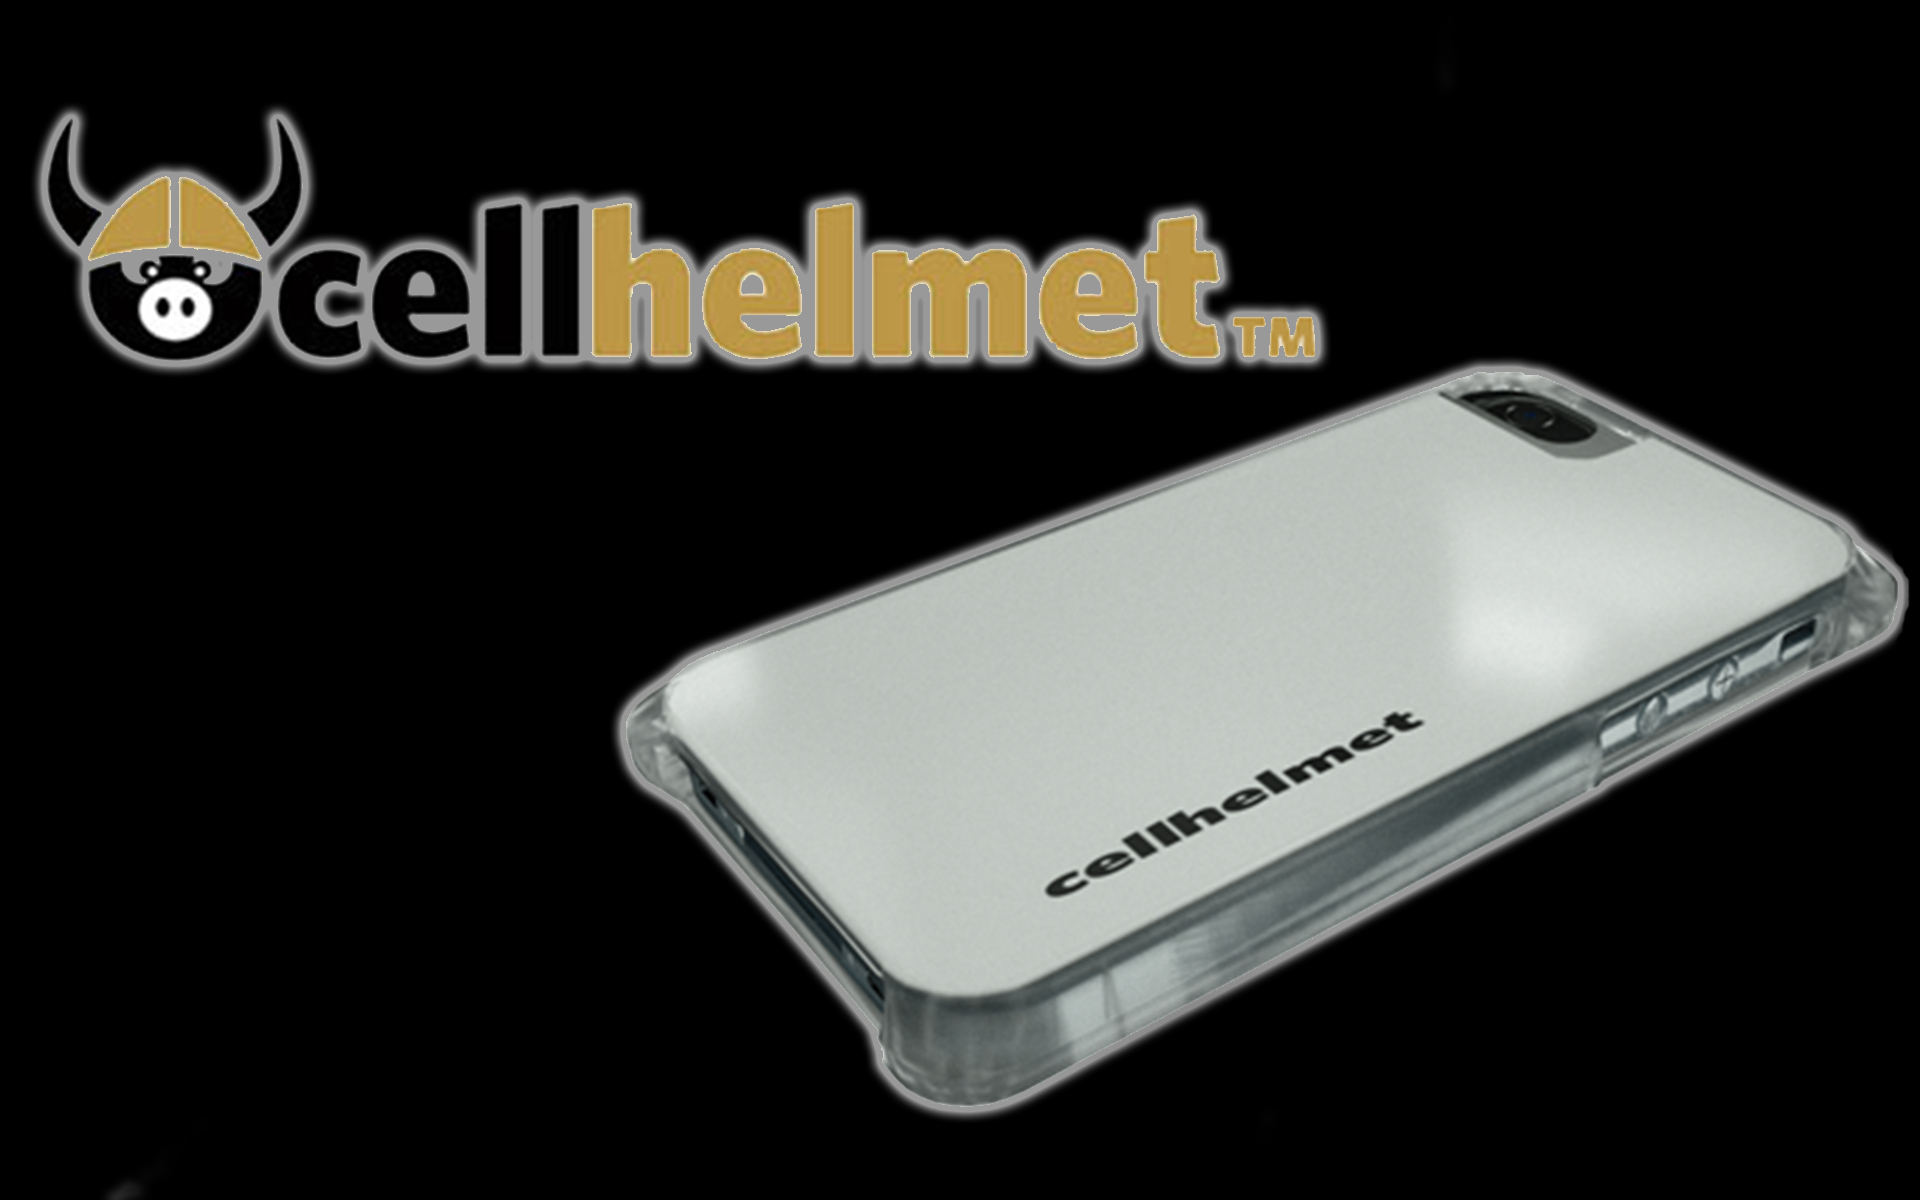 Cell Helmet - The iPhone Case With Accidental Damage Coverage [REVIEW]